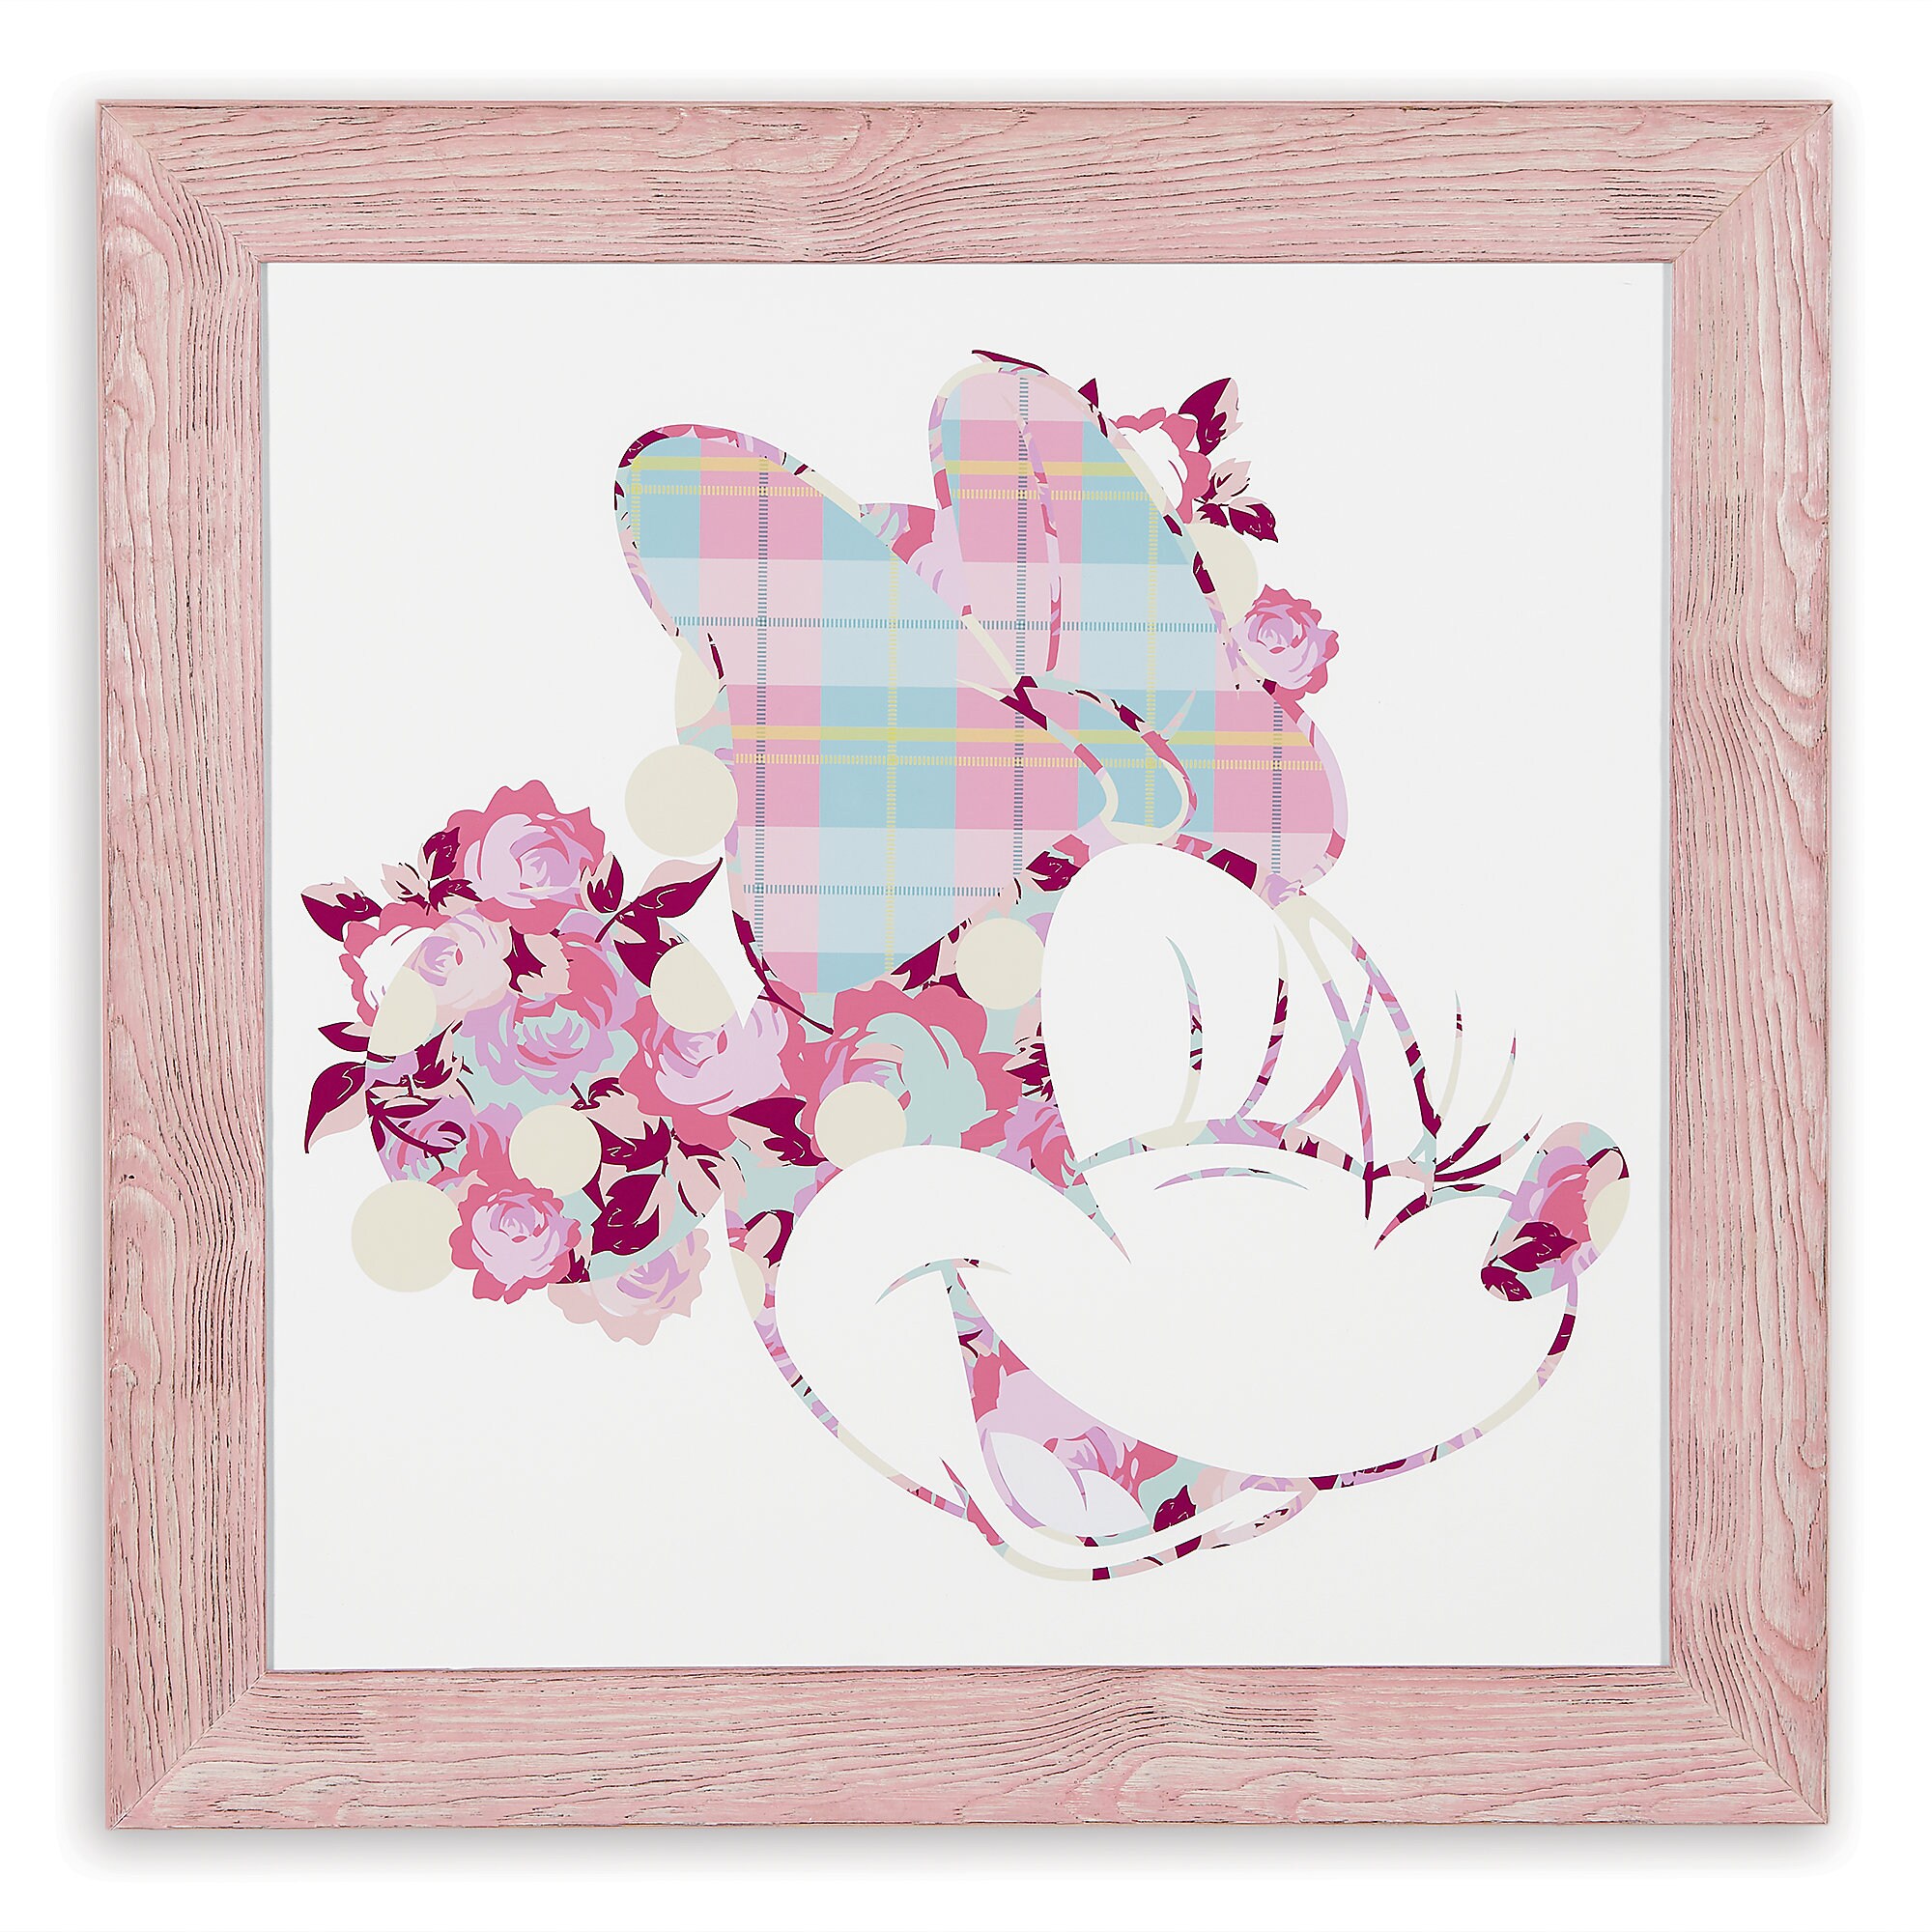 Minnie Mouse ''How Sweet'' Framed Giclée on Archival Paper by Ethan Allen